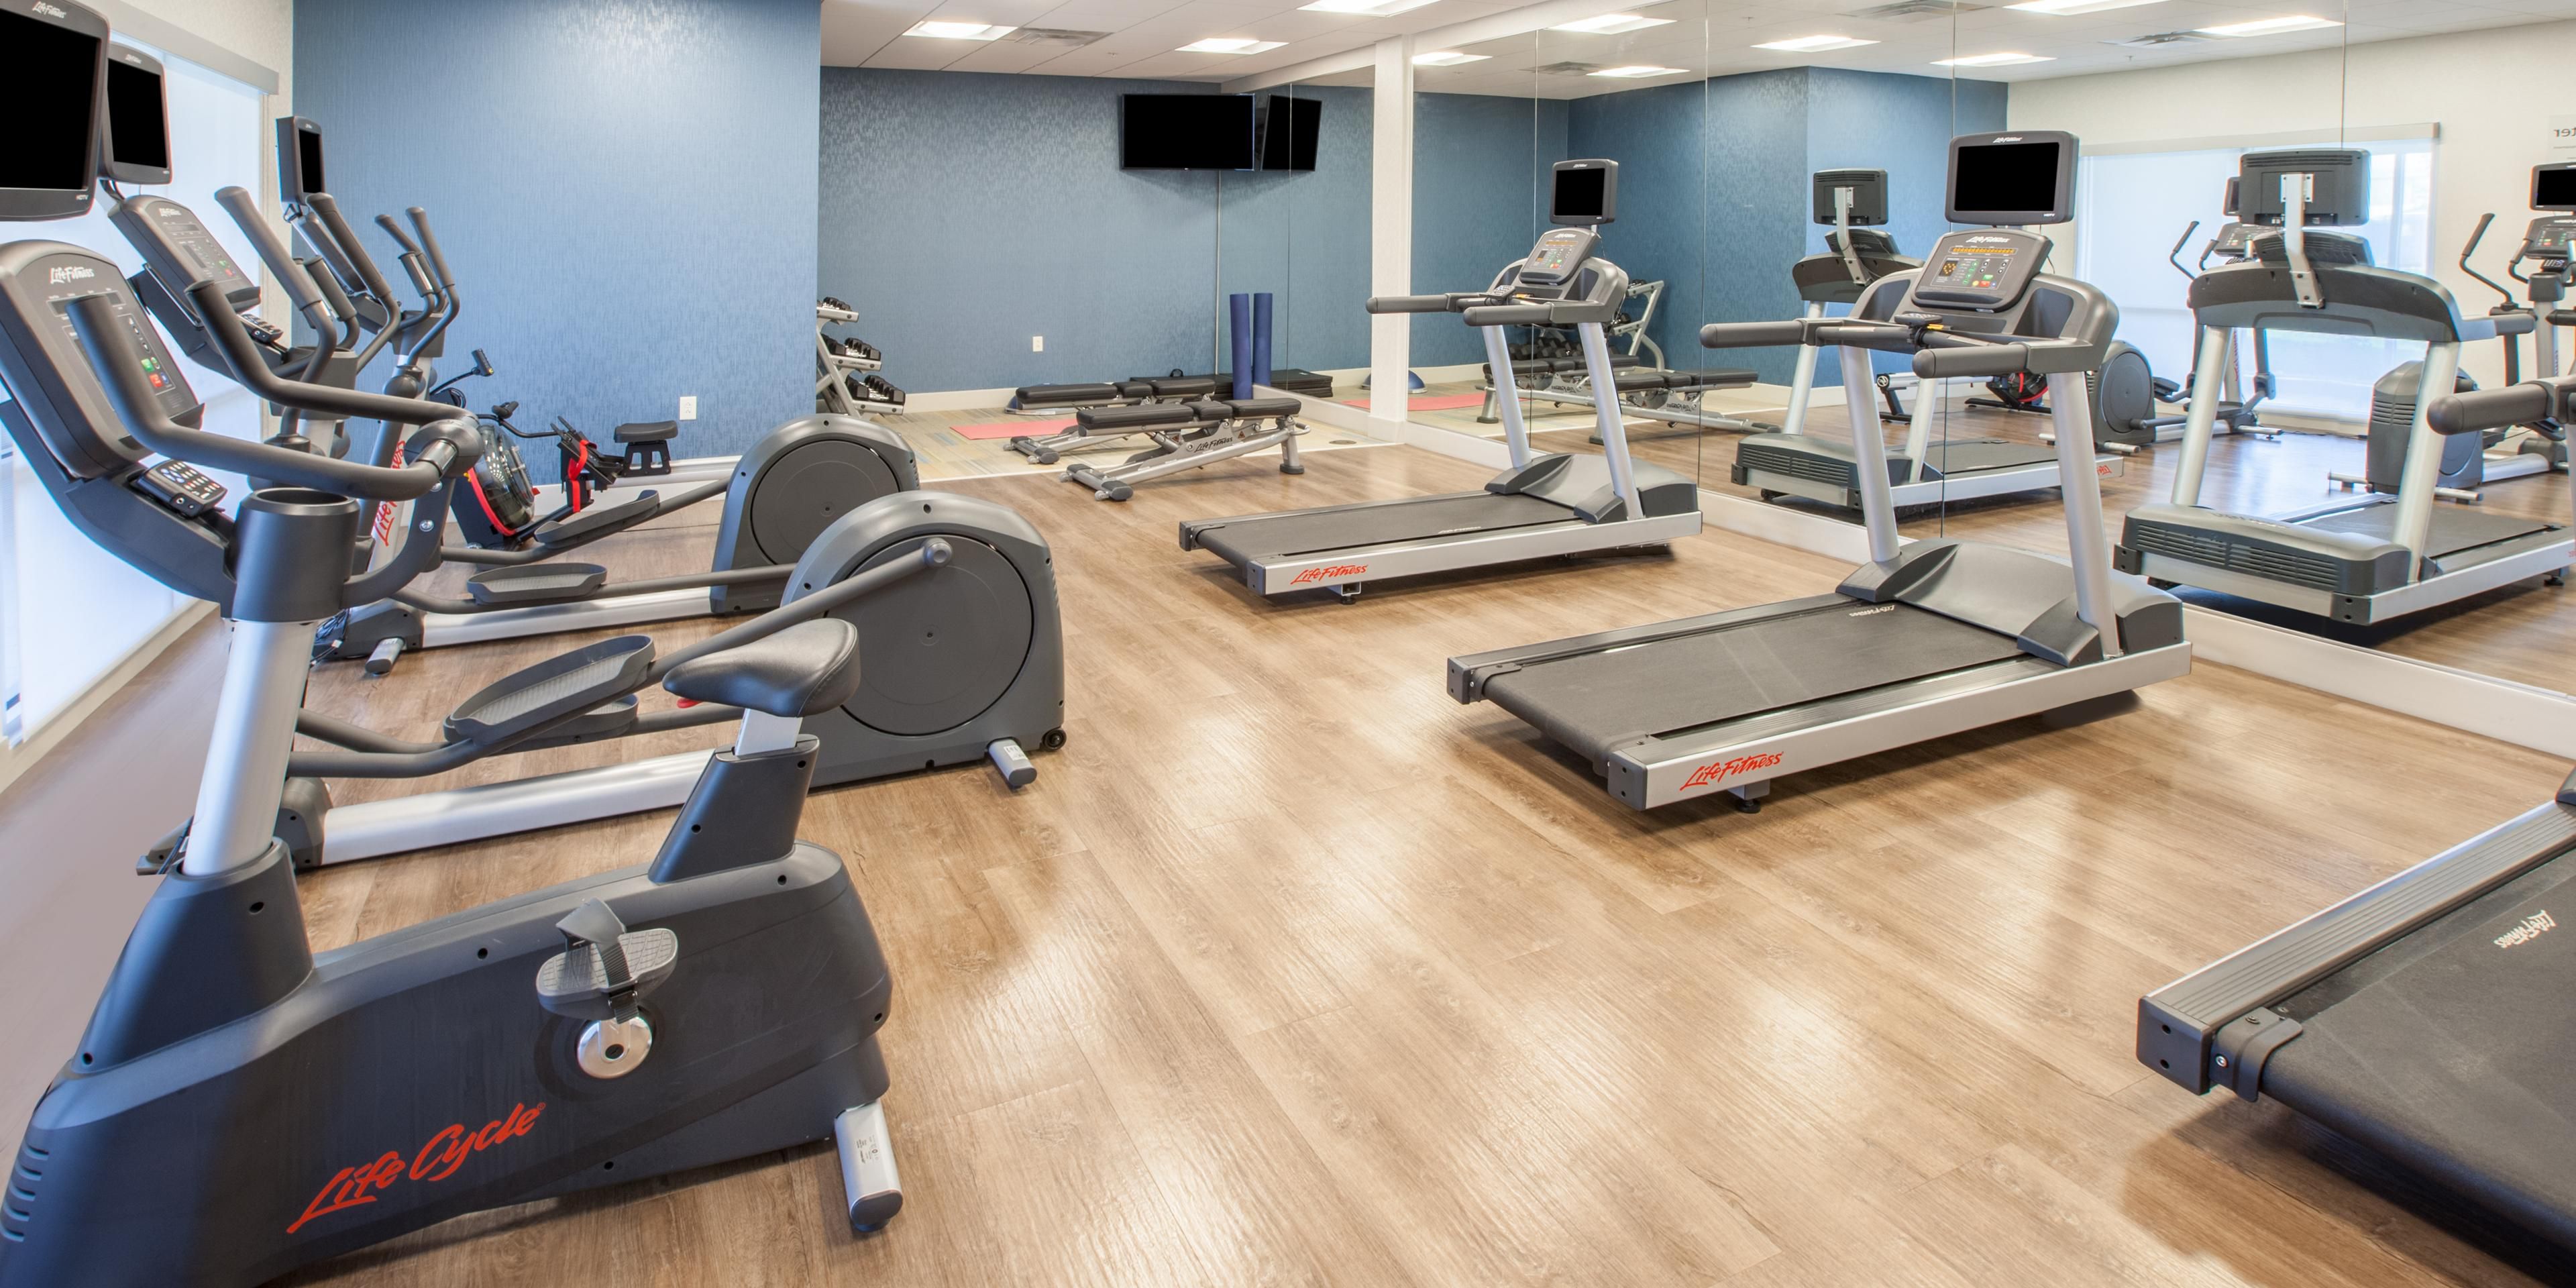 The hotel features a 24-hour State-of-the-Art Fitness Center.